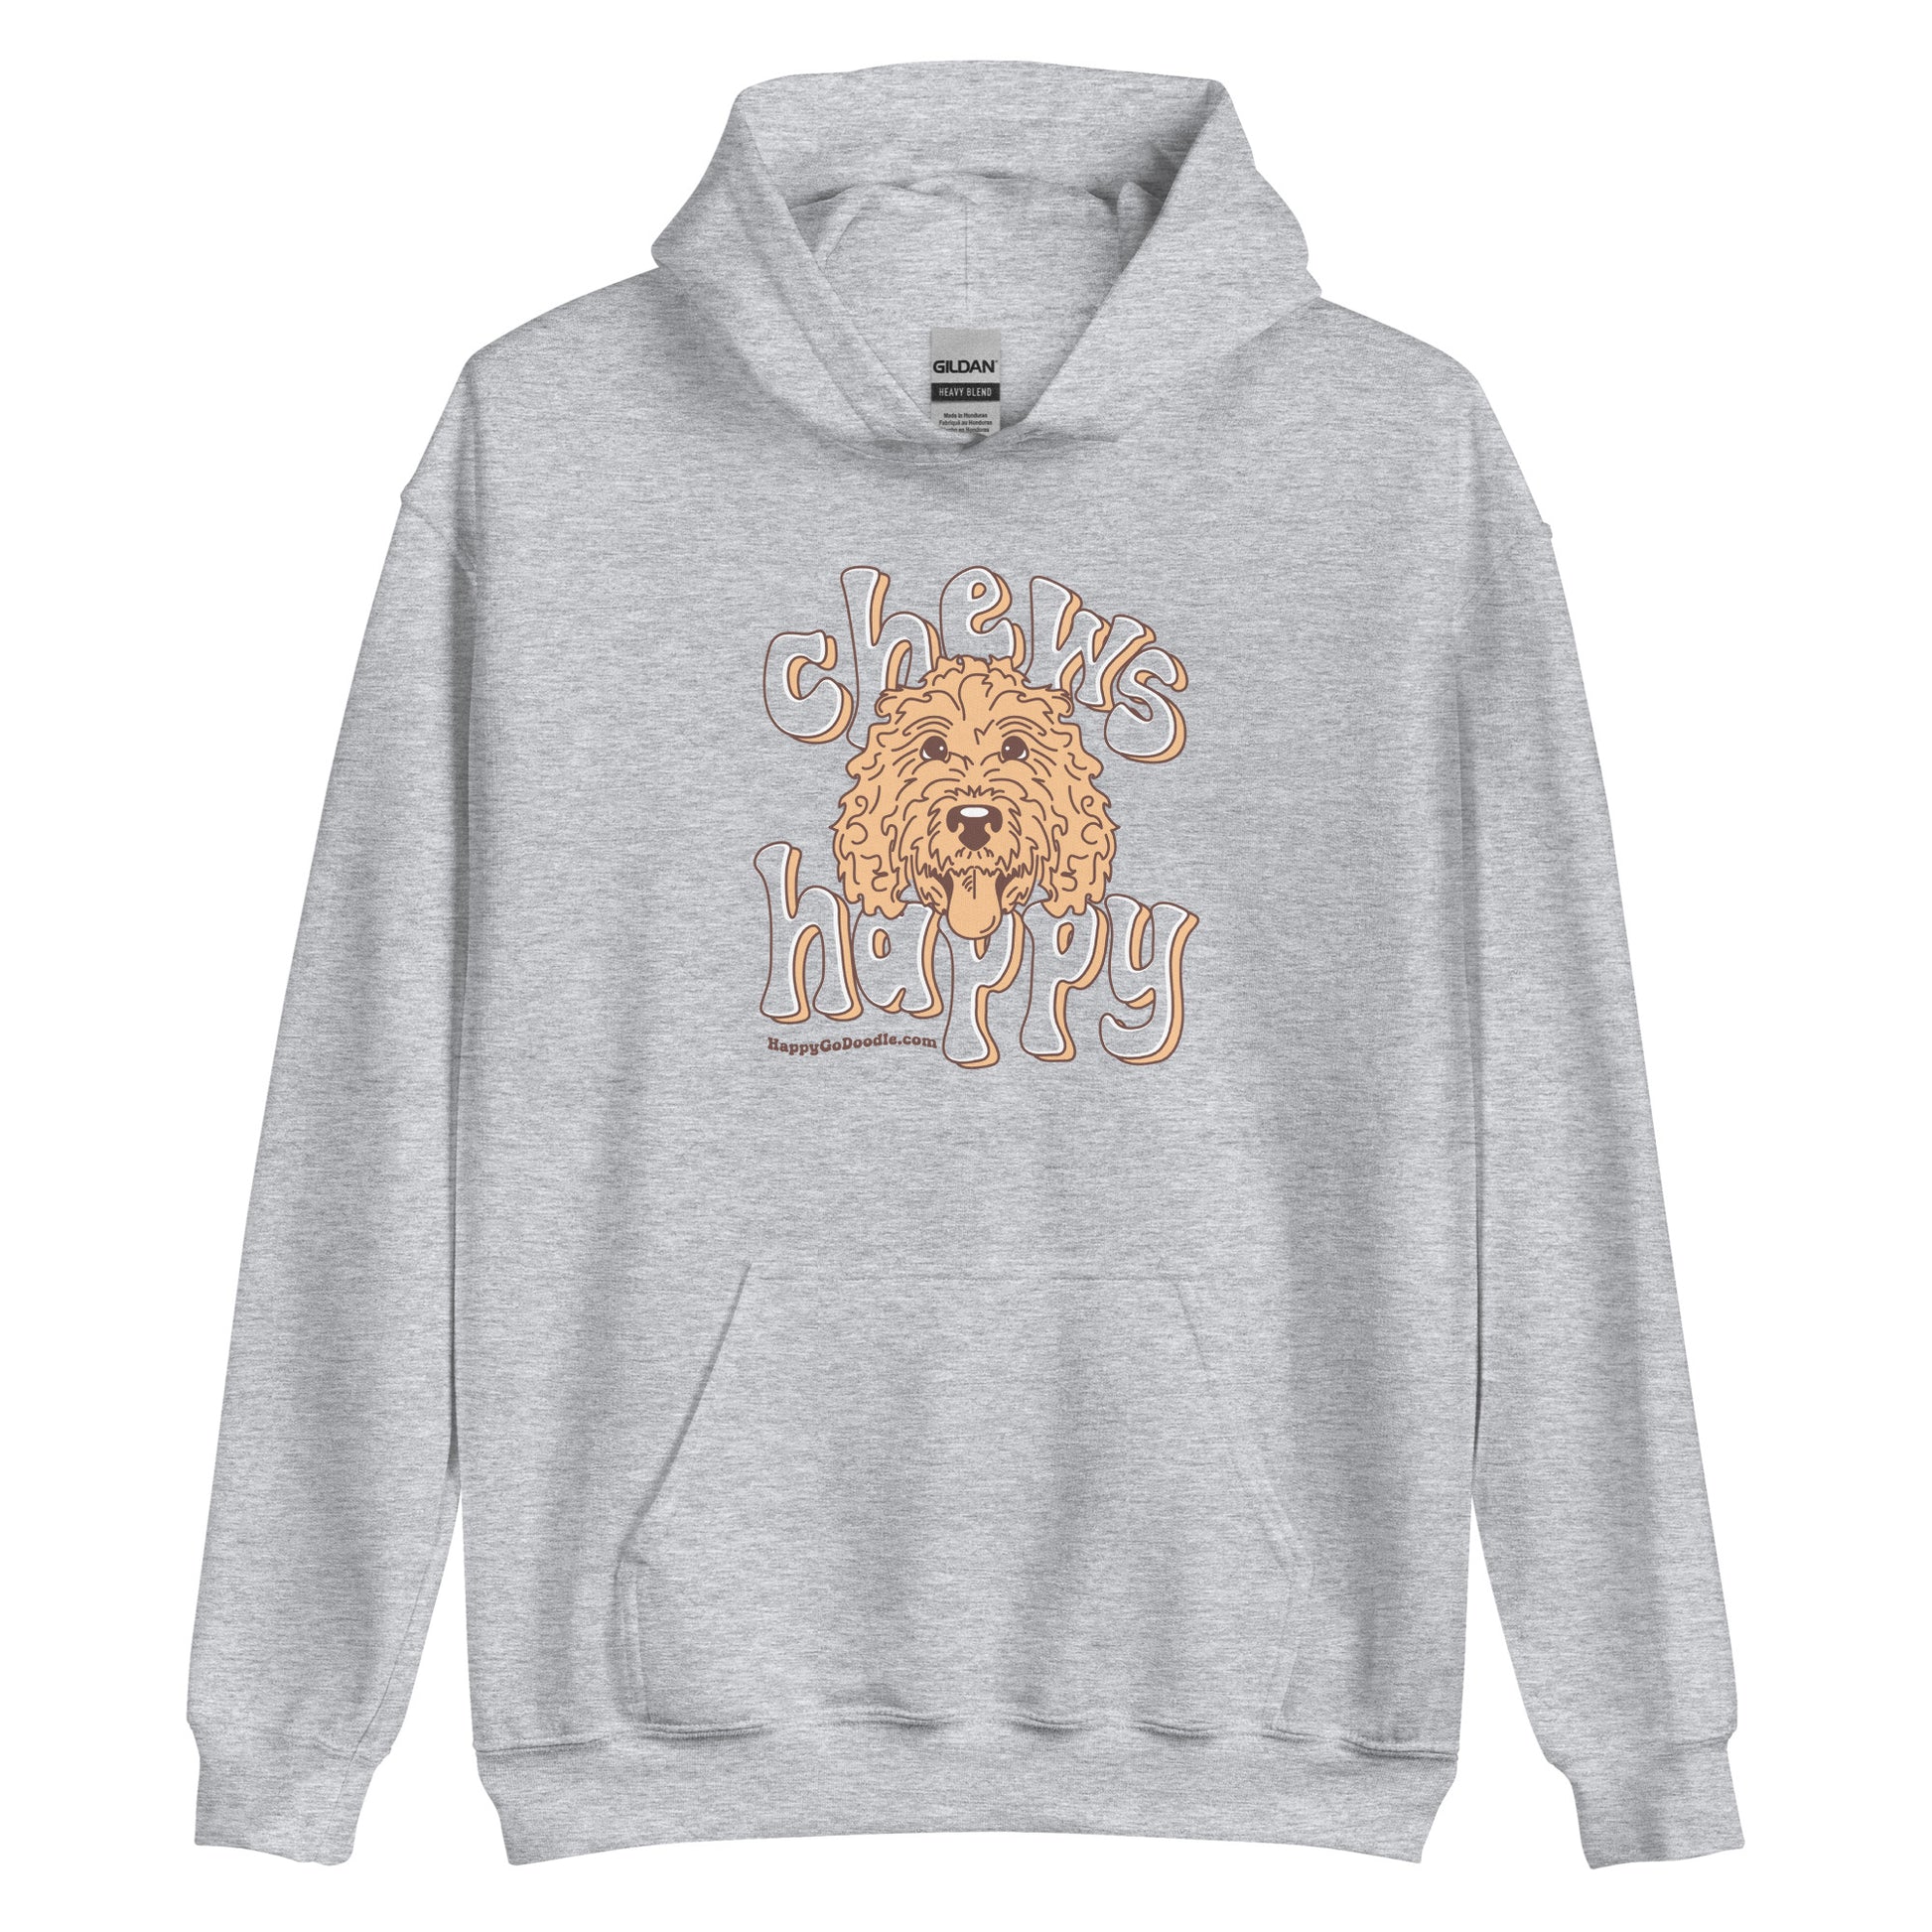 Goldendoodle hoodie with Goldendoodle face and words "Chews Happy" in sport grey color